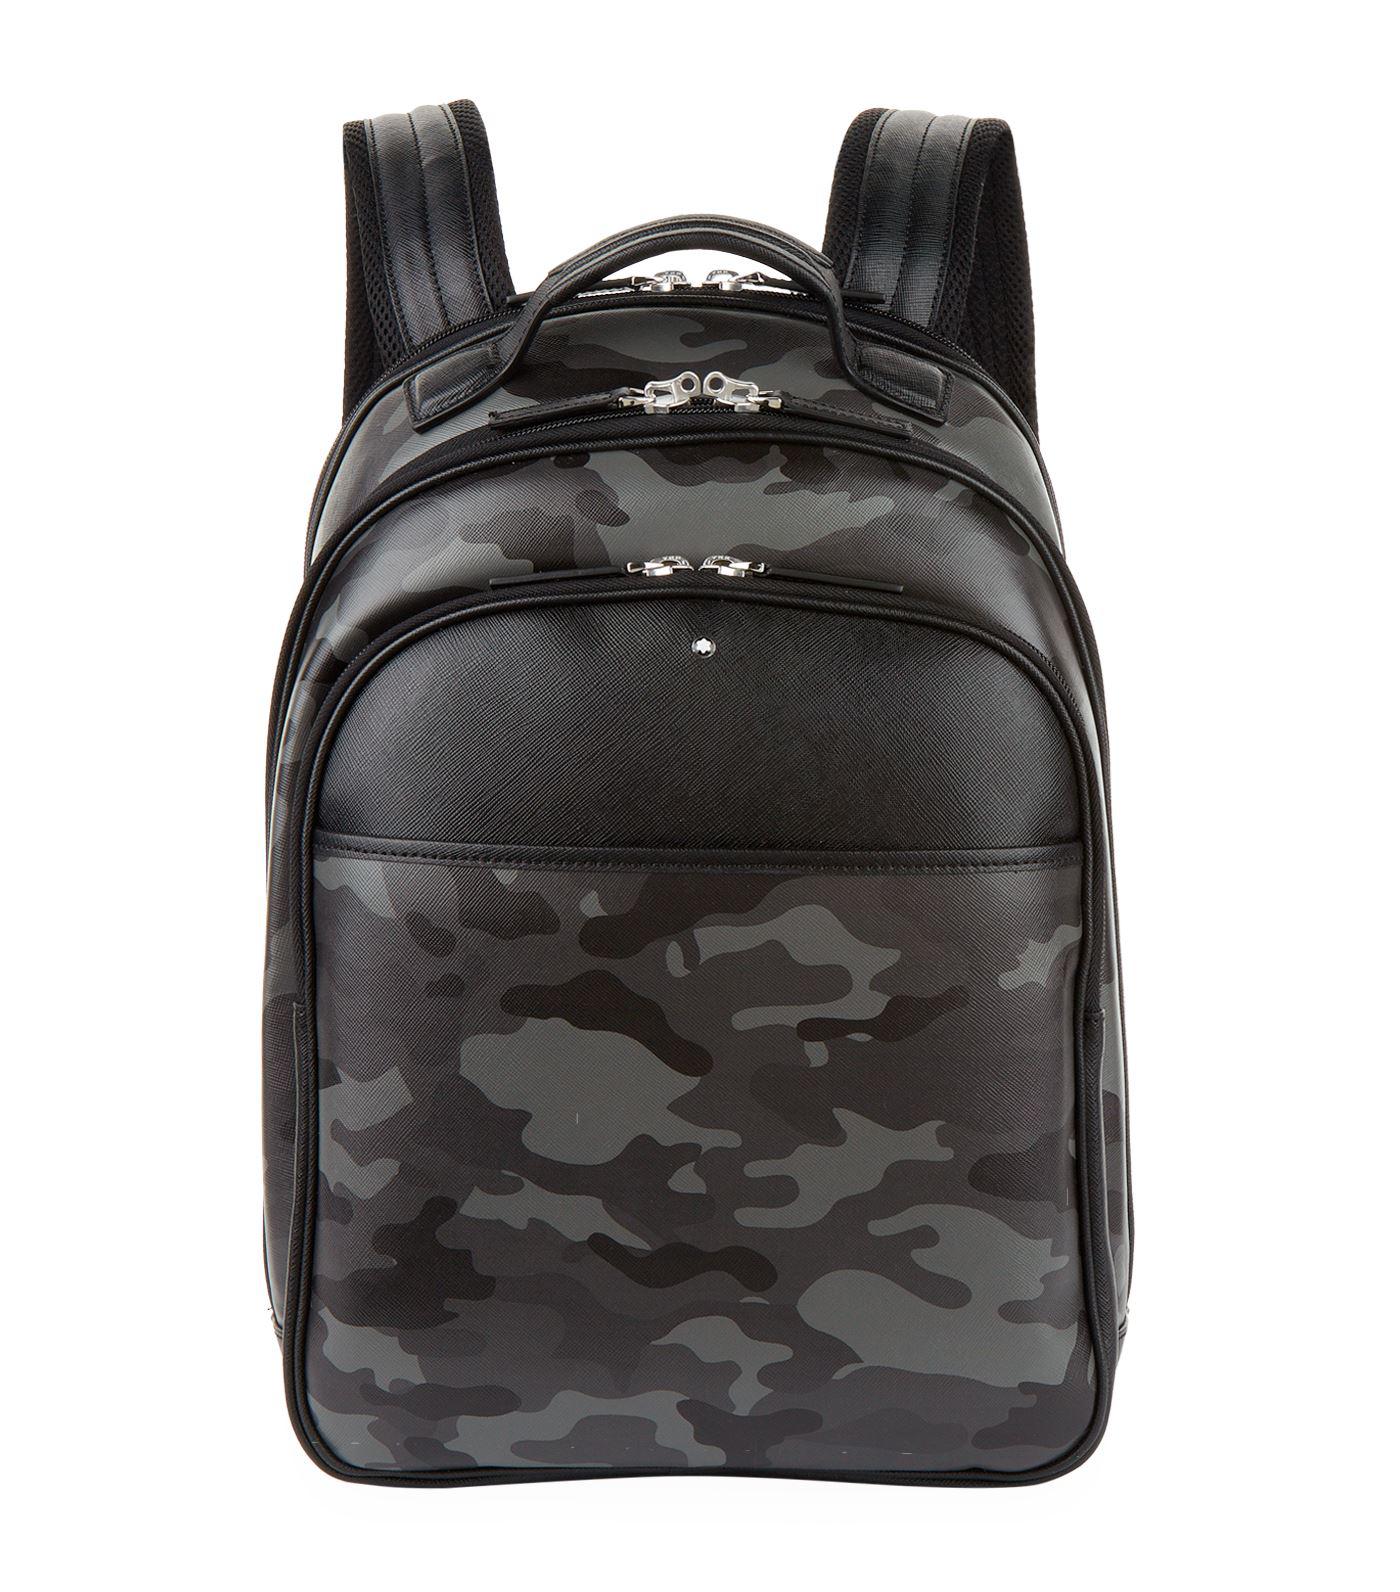 Montblanc Leather Camo Backpack in Grey (Gray) for Men - Lyst